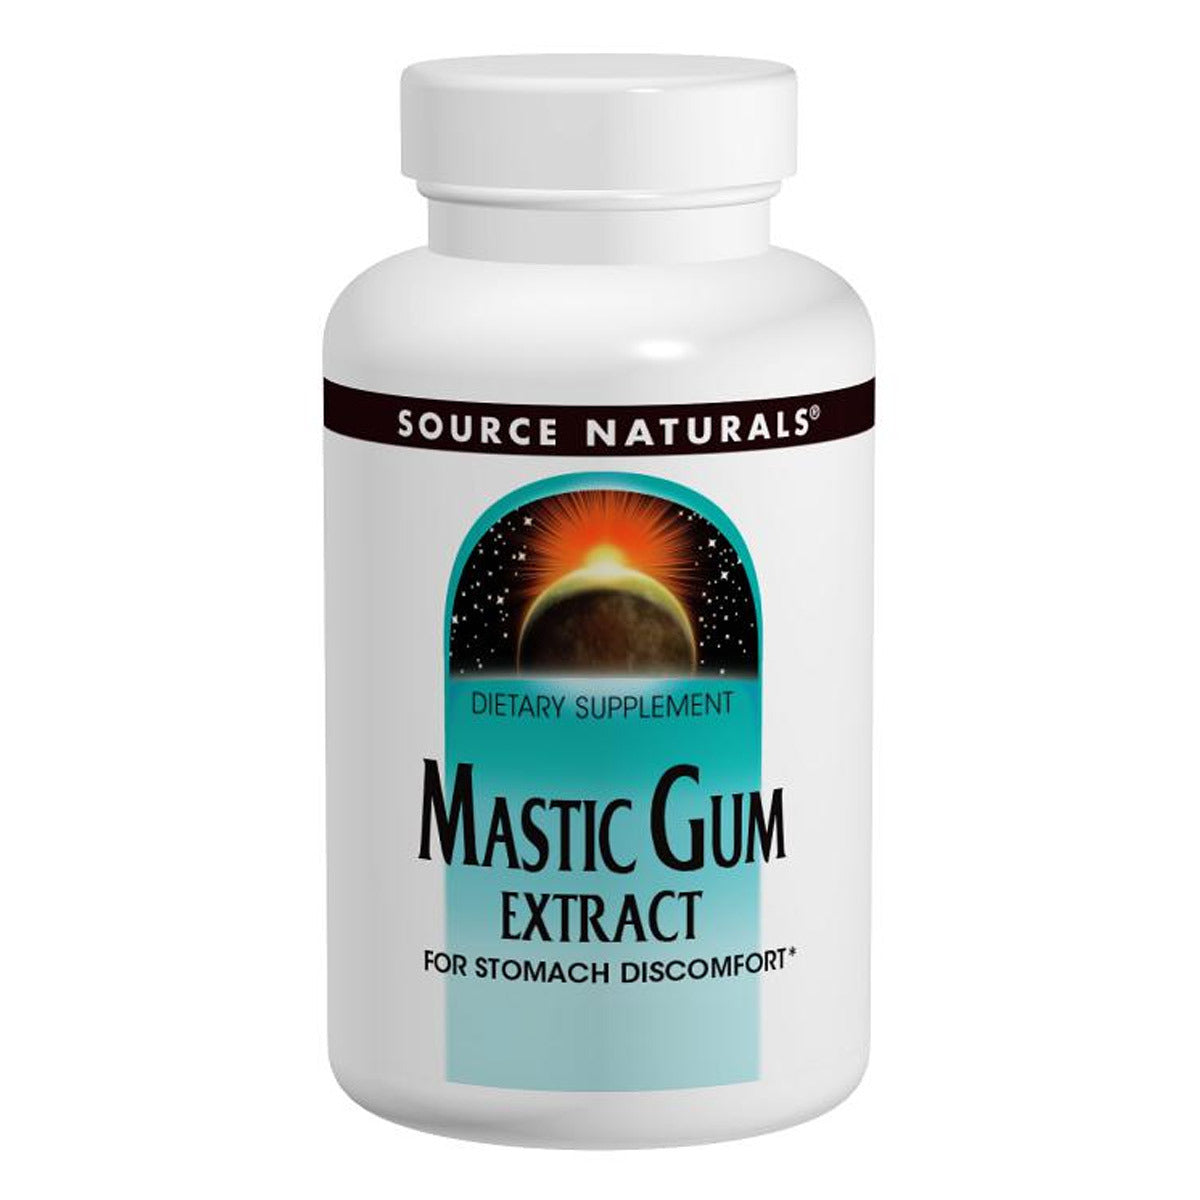 Primary image of Mastic Gum Extract 500mg